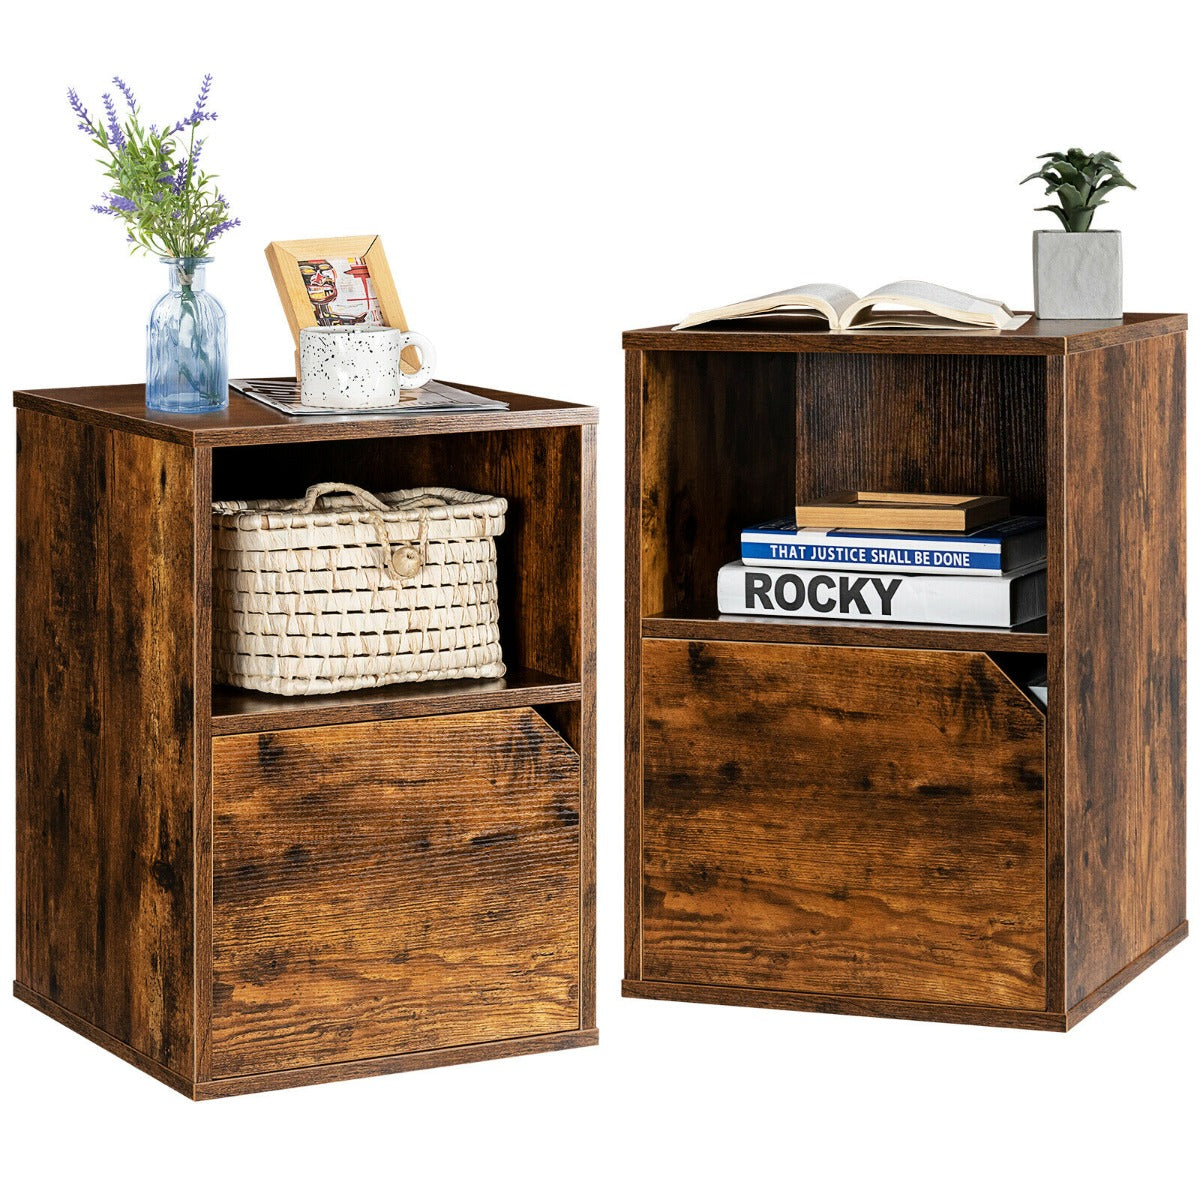 Set of 2 Wooden Bedside Tables with Open Shelf and Door-Brown